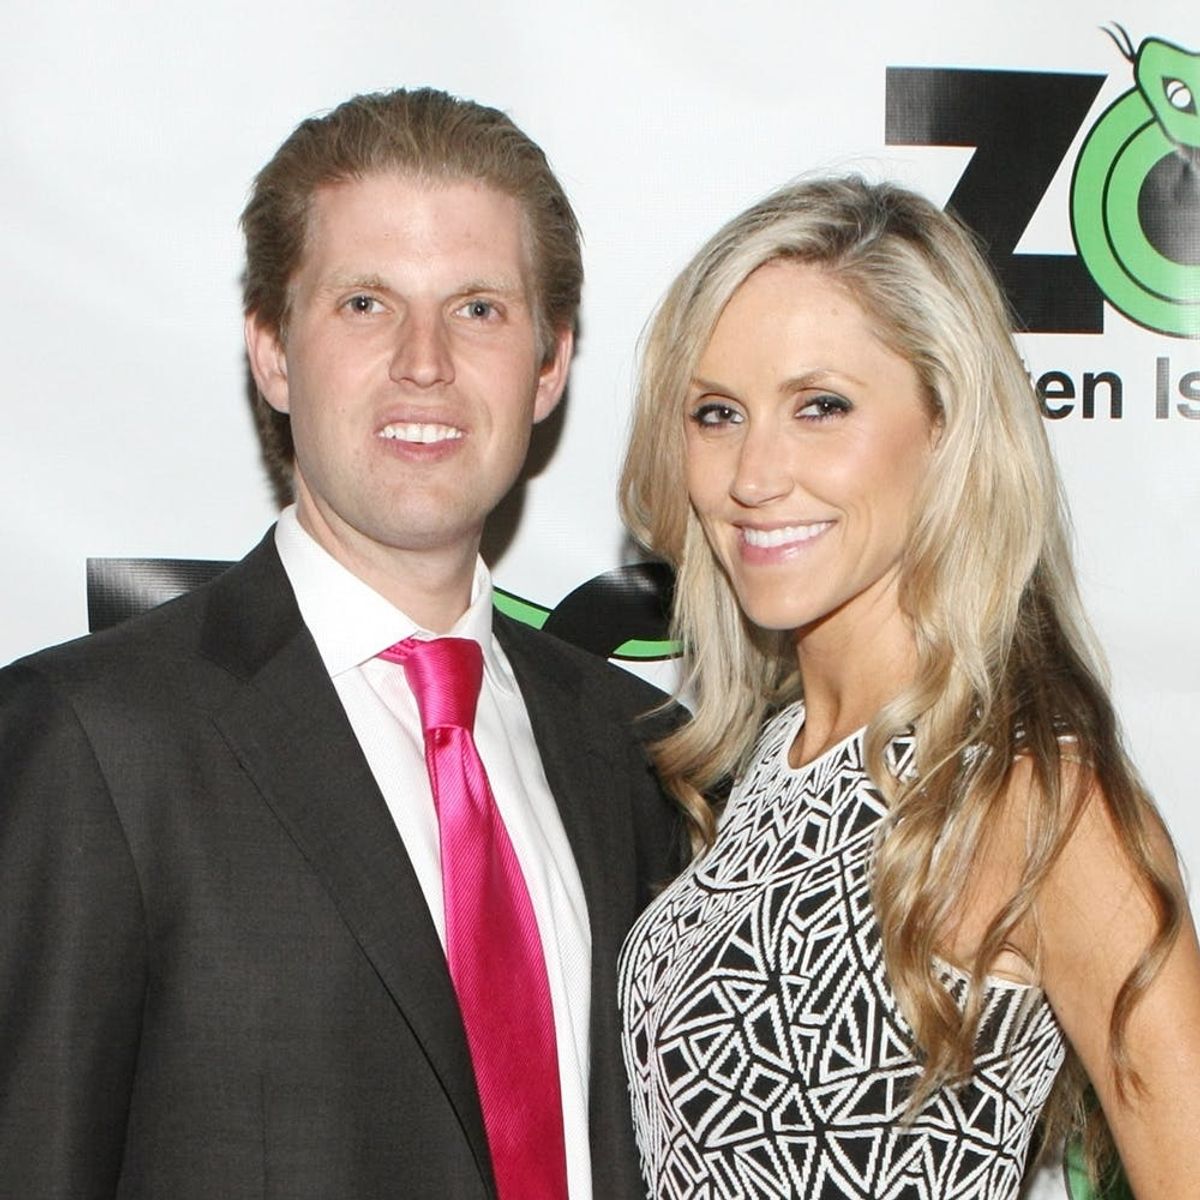 Eric Trump and His Wife Lara Are Expecting Their First Baby